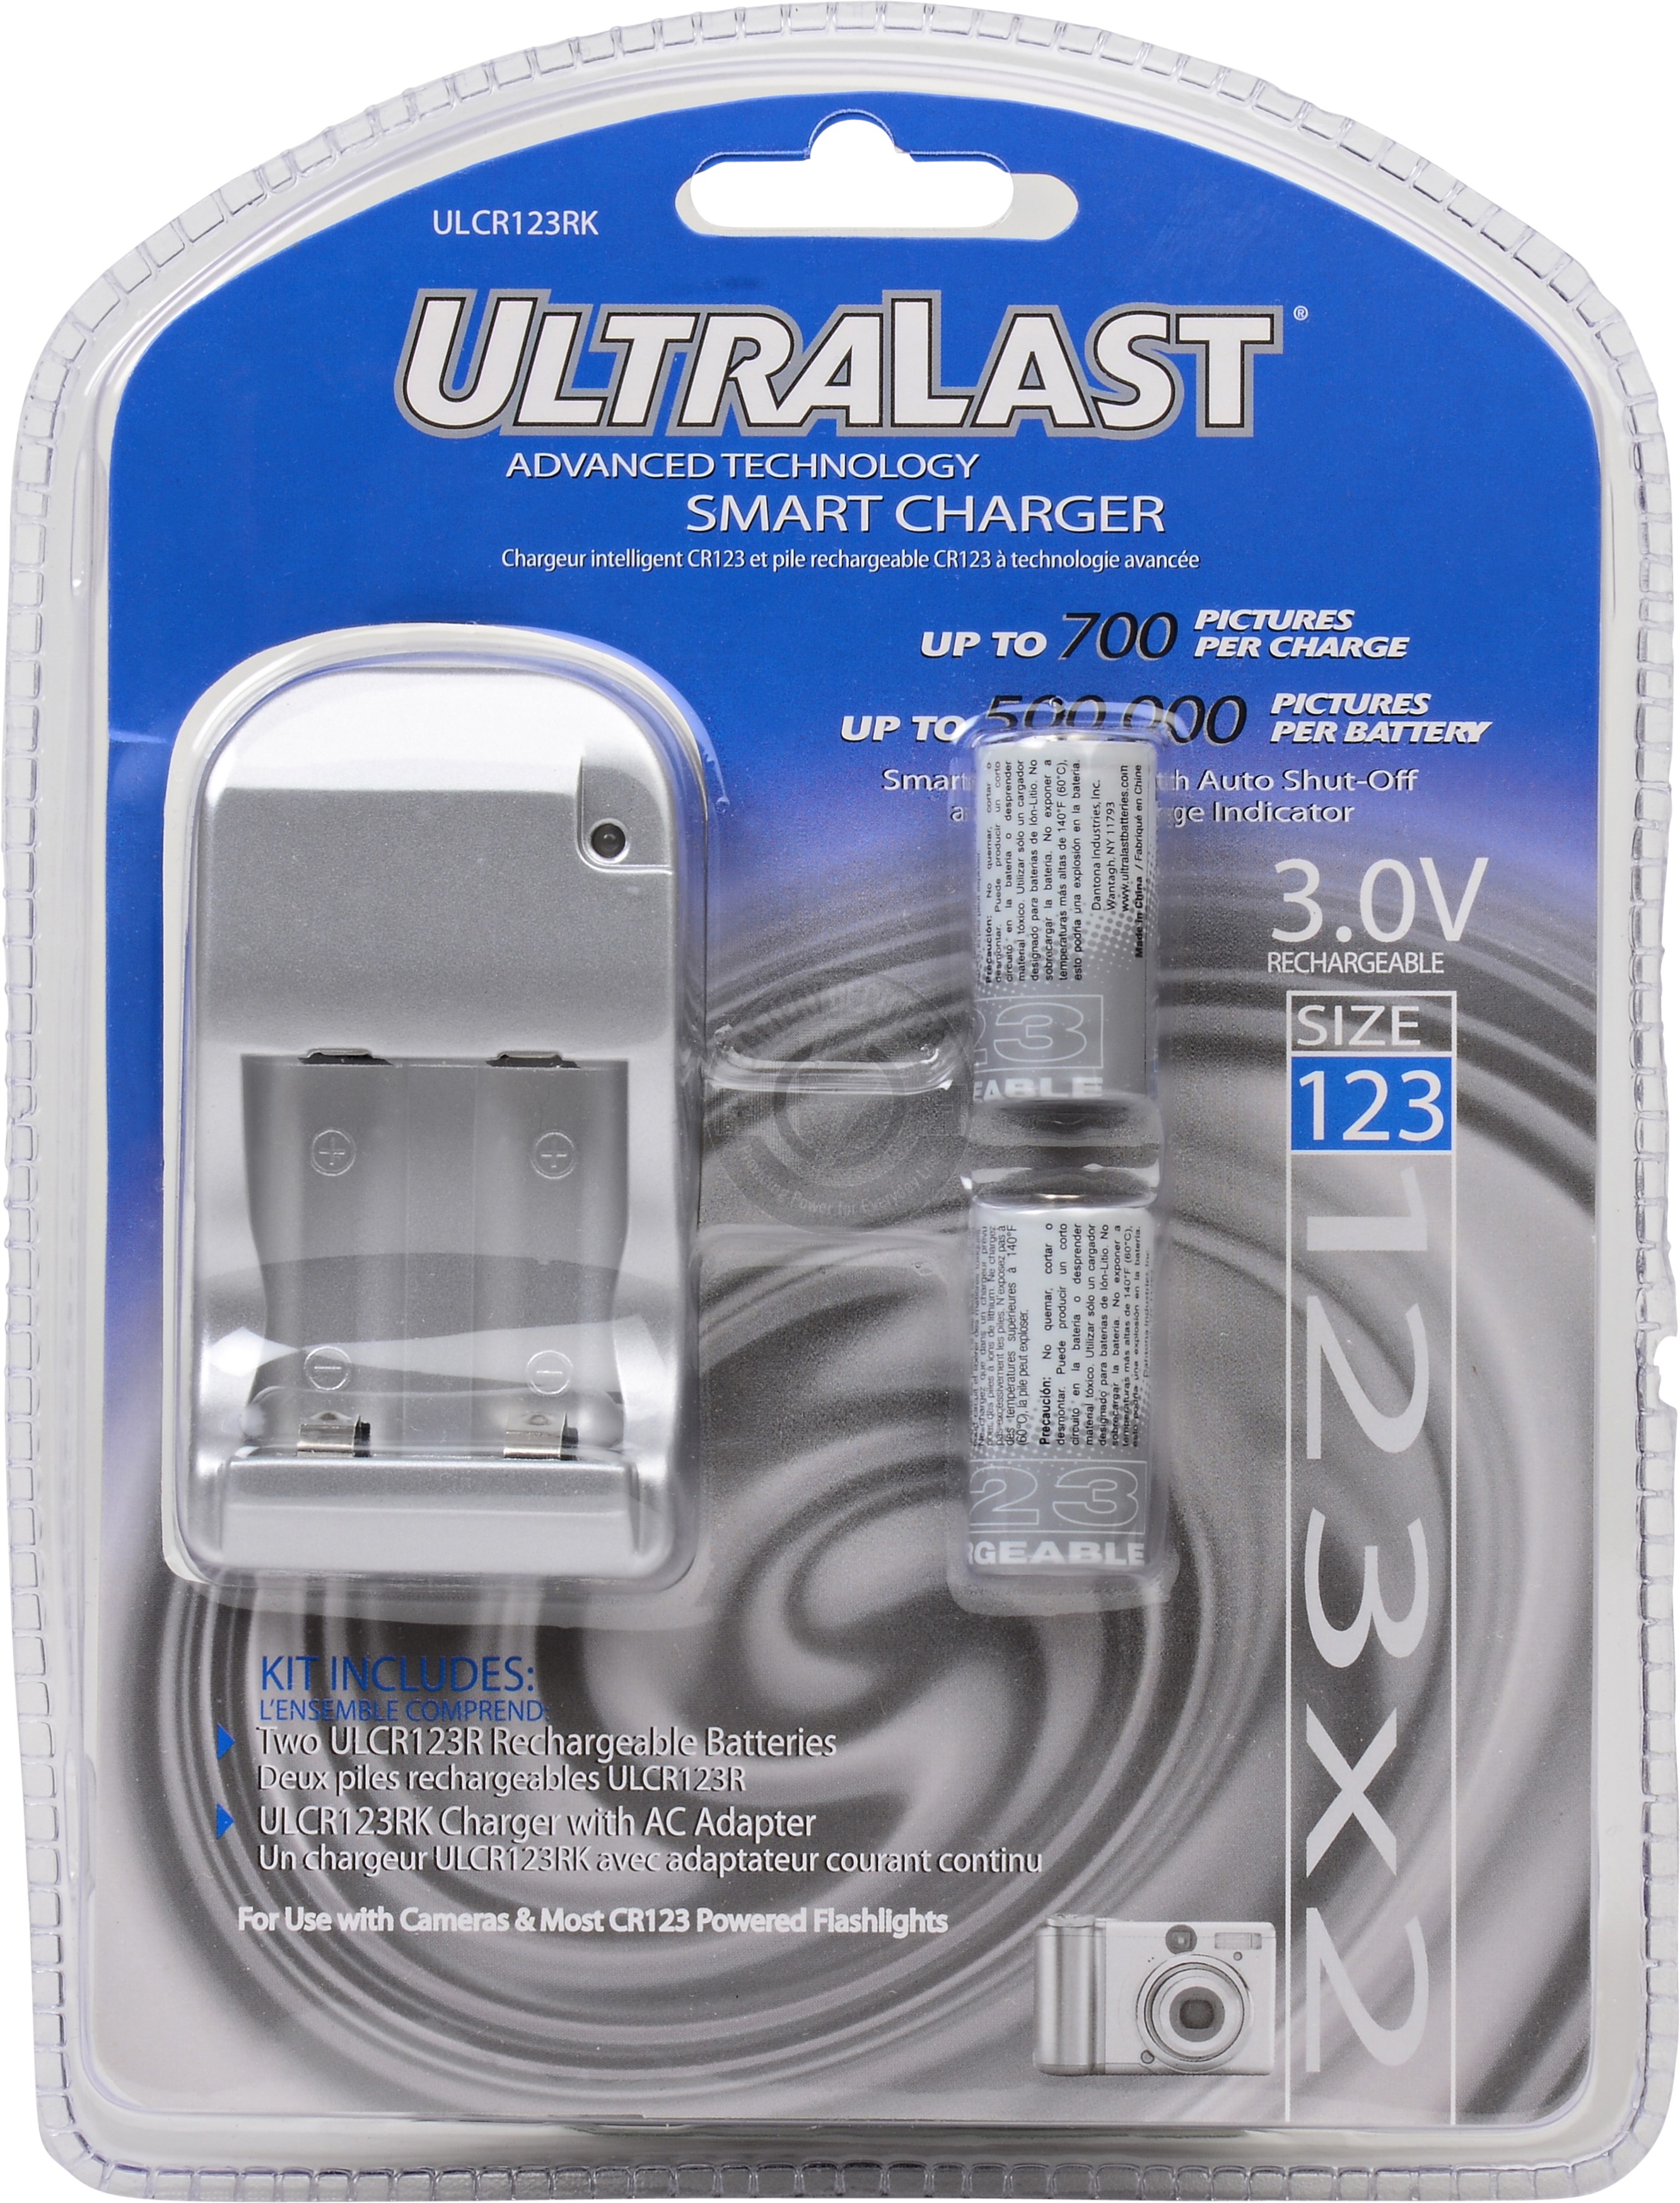 Ultralast Rechargeable CR123 Charger Kit